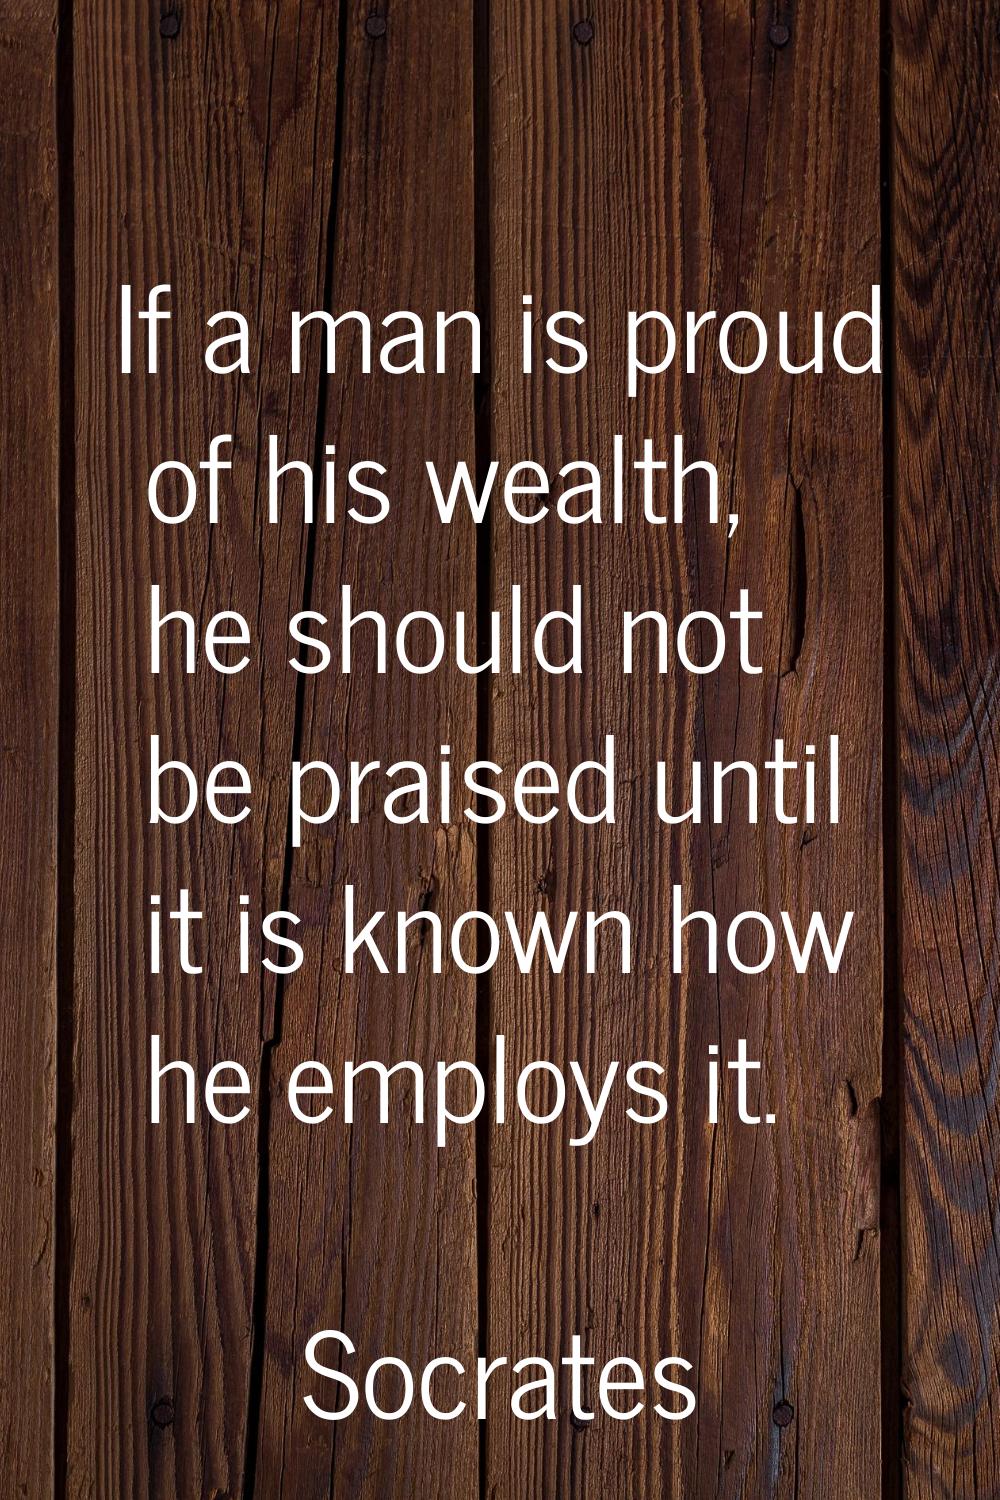 If a man is proud of his wealth, he should not be praised until it is known how he employs it.